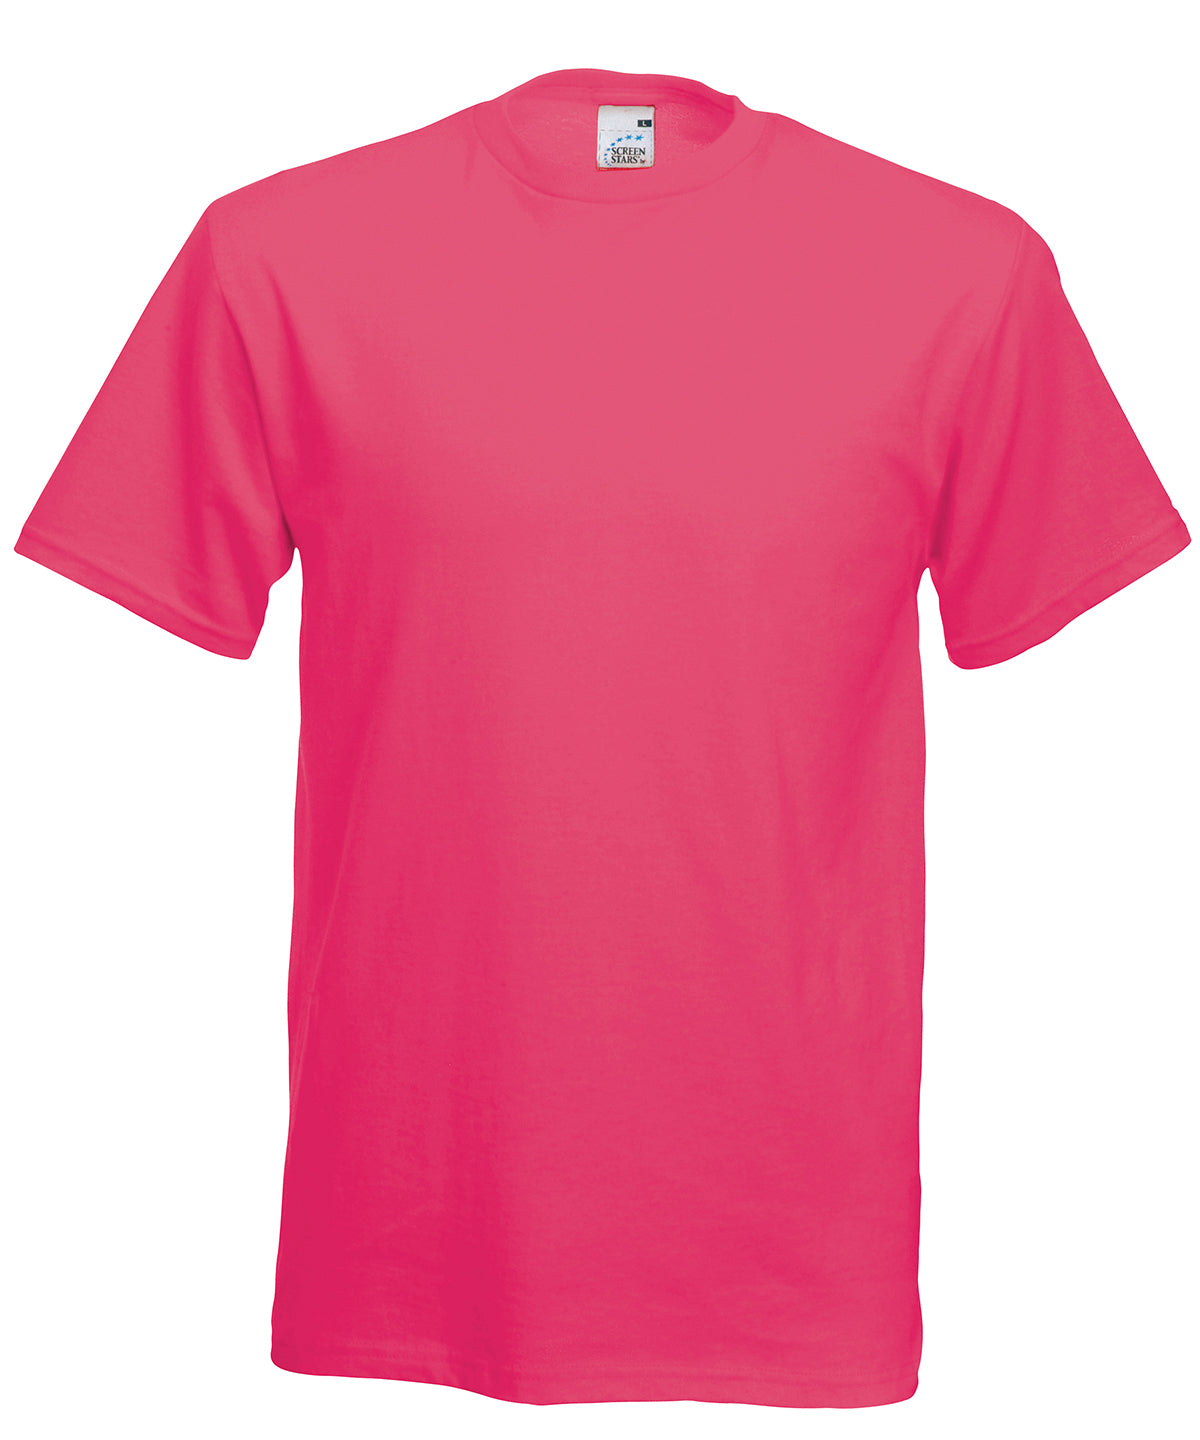 Design your own Teeshirt with One colour Print